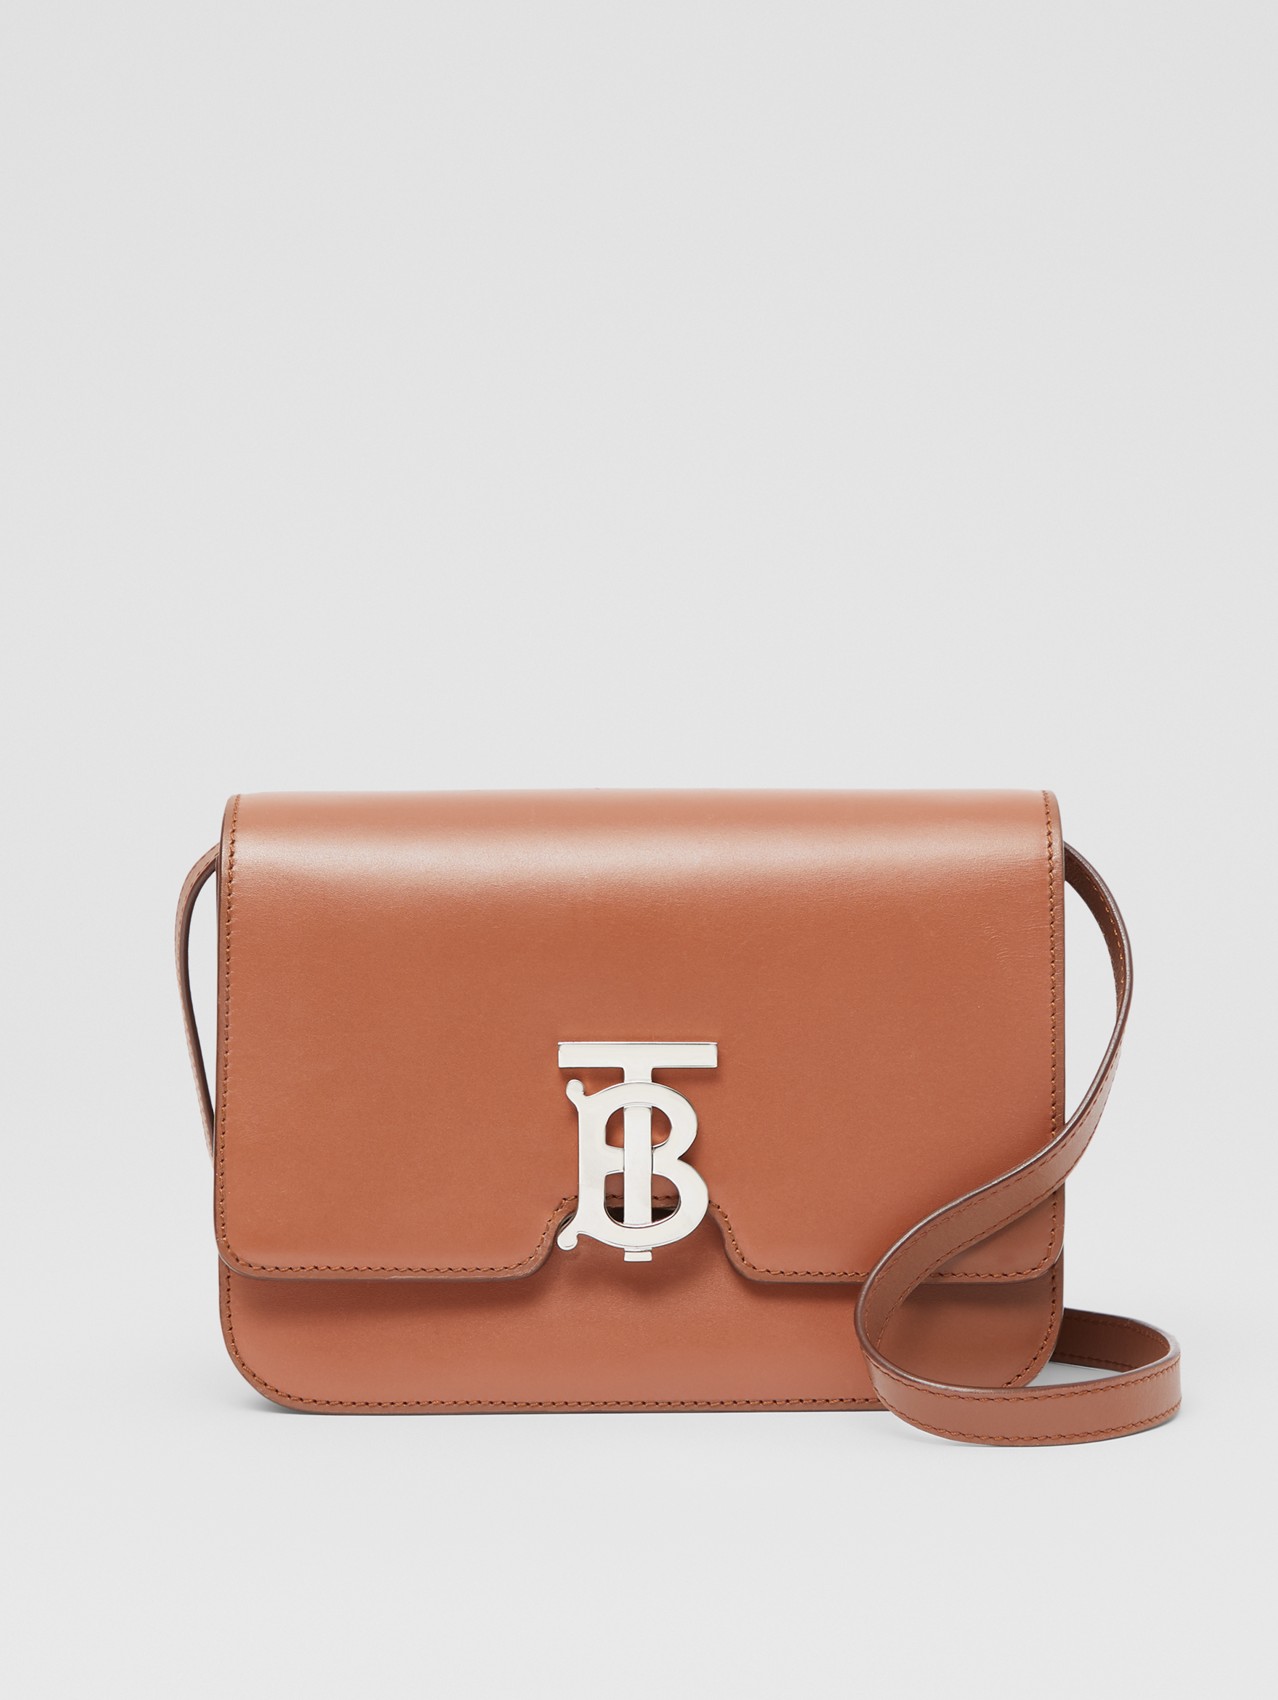 Small Leather TB Bag in Malt Brown